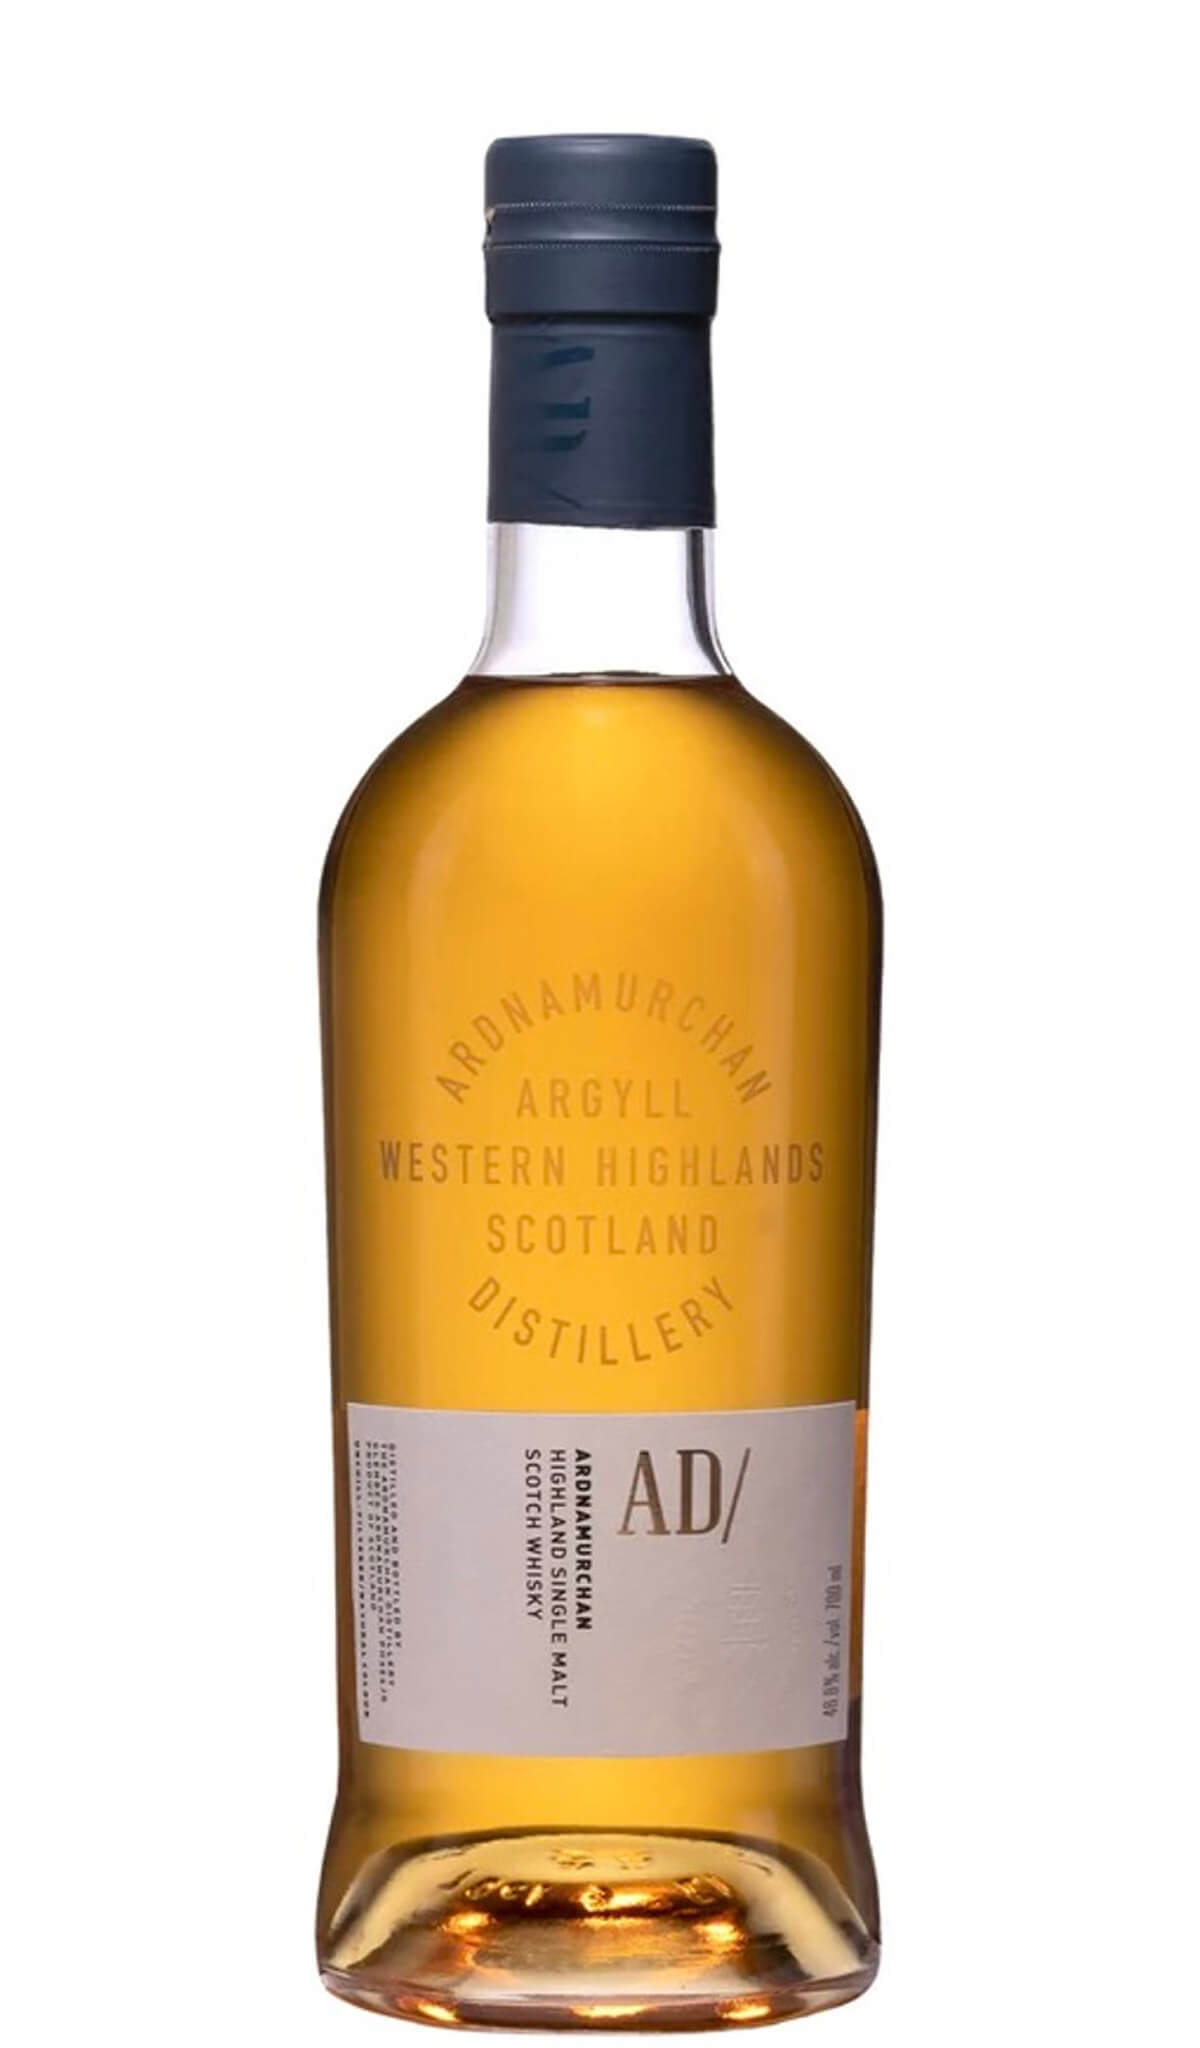 Find out more, explore the range and purchase Ardnamurchan Highland Single Malt AD/ 700ml available online at Wine Sellers Direct - Australia's independent liquor specialists.